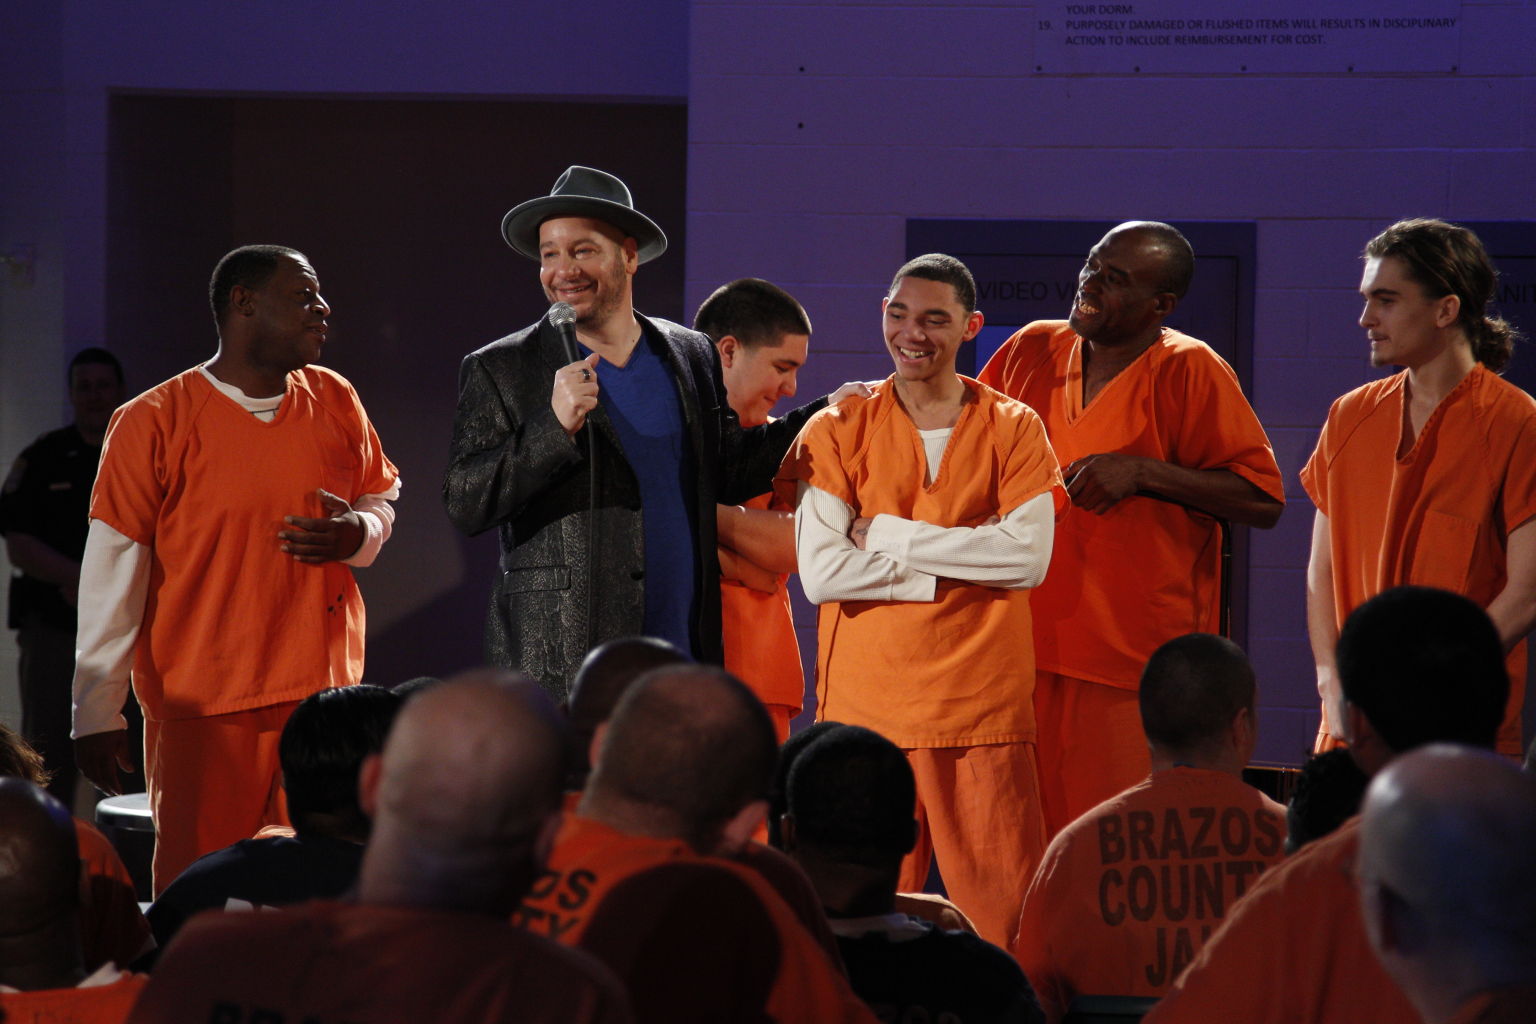 Jeff Ross Roasts Criminals Live in Brazos County Jail